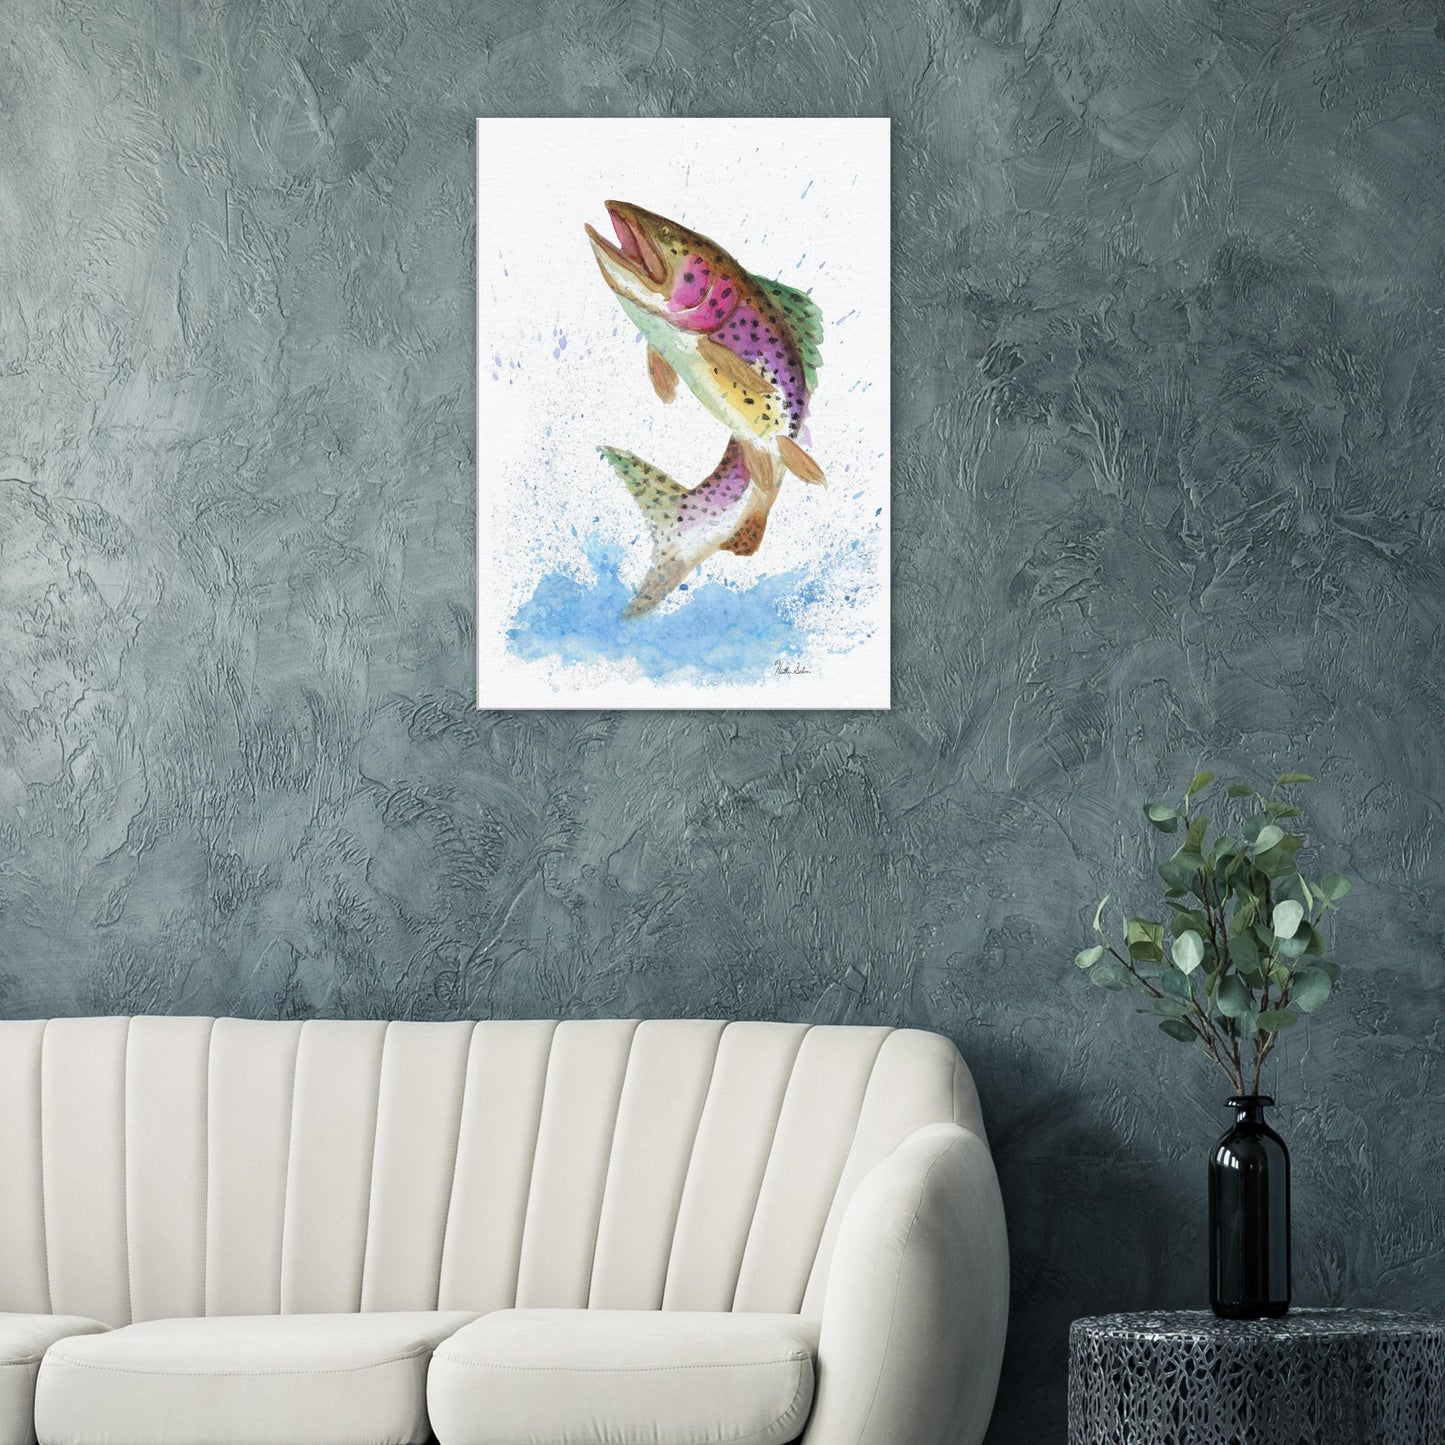 28 by 40 inch slim canvas wall art print featuring a watercolor painting of a rainbow trout leaping from the water. Shown on green wall above white sofa, end table and vase.